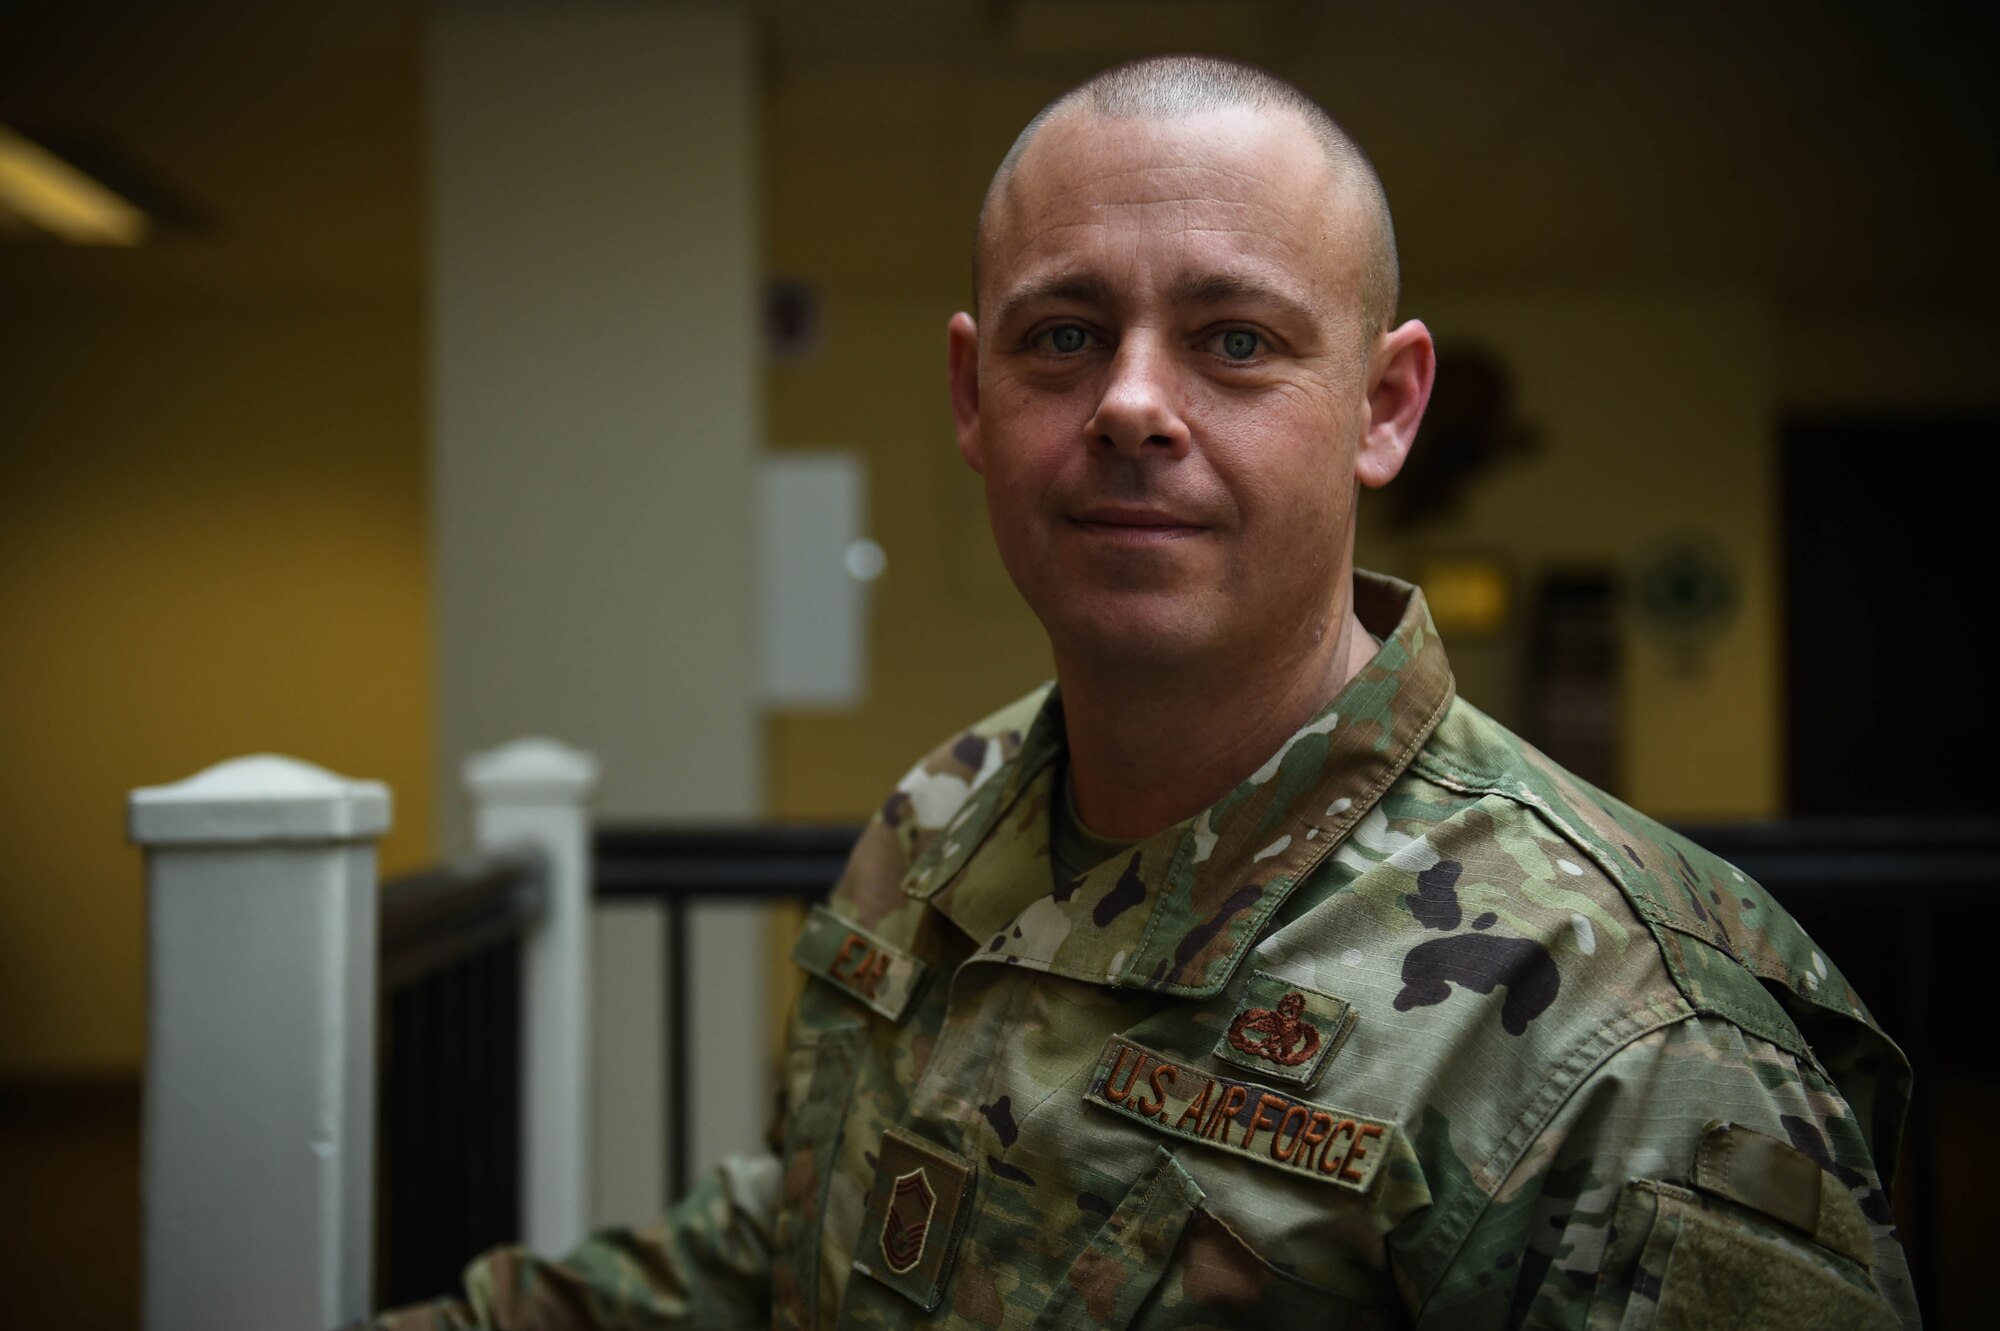 Senior Master Sgt. Andrew Earll, 62nd Maintenance Squadron superintendent, poses for a photo on Joint Base Lewis-McChord, Wash., Nov. 26, 2019. He was one of the nine McChord Airmen selected this year for promotion to chief master sergeant, the highest enlisted rank in the Air Force. 

“Making chief master sergeant means the world to me and my family.  I love the Air Force and what it has done for us. It is an opportunity to continue to serve and grow, and develop future leaders.
The Air Force is a team sport and a family.  Deciding what and who you want to be is important. Caring, putting in the time, the desire to do the best job you can every day and having the courage to have difficult conversations when needed are basic keys to success.  It is not about you but the positive impacts you have on others.
When I first found out, I immediately thought of my first supervisors that took the time to teach how to be an Airman.  I owe them the world.  Supervisors need to be mindful of the impacts they can have on subordinates.”

(U.S. Air Force photo by Airman 1st Class Mikayla Heineck)